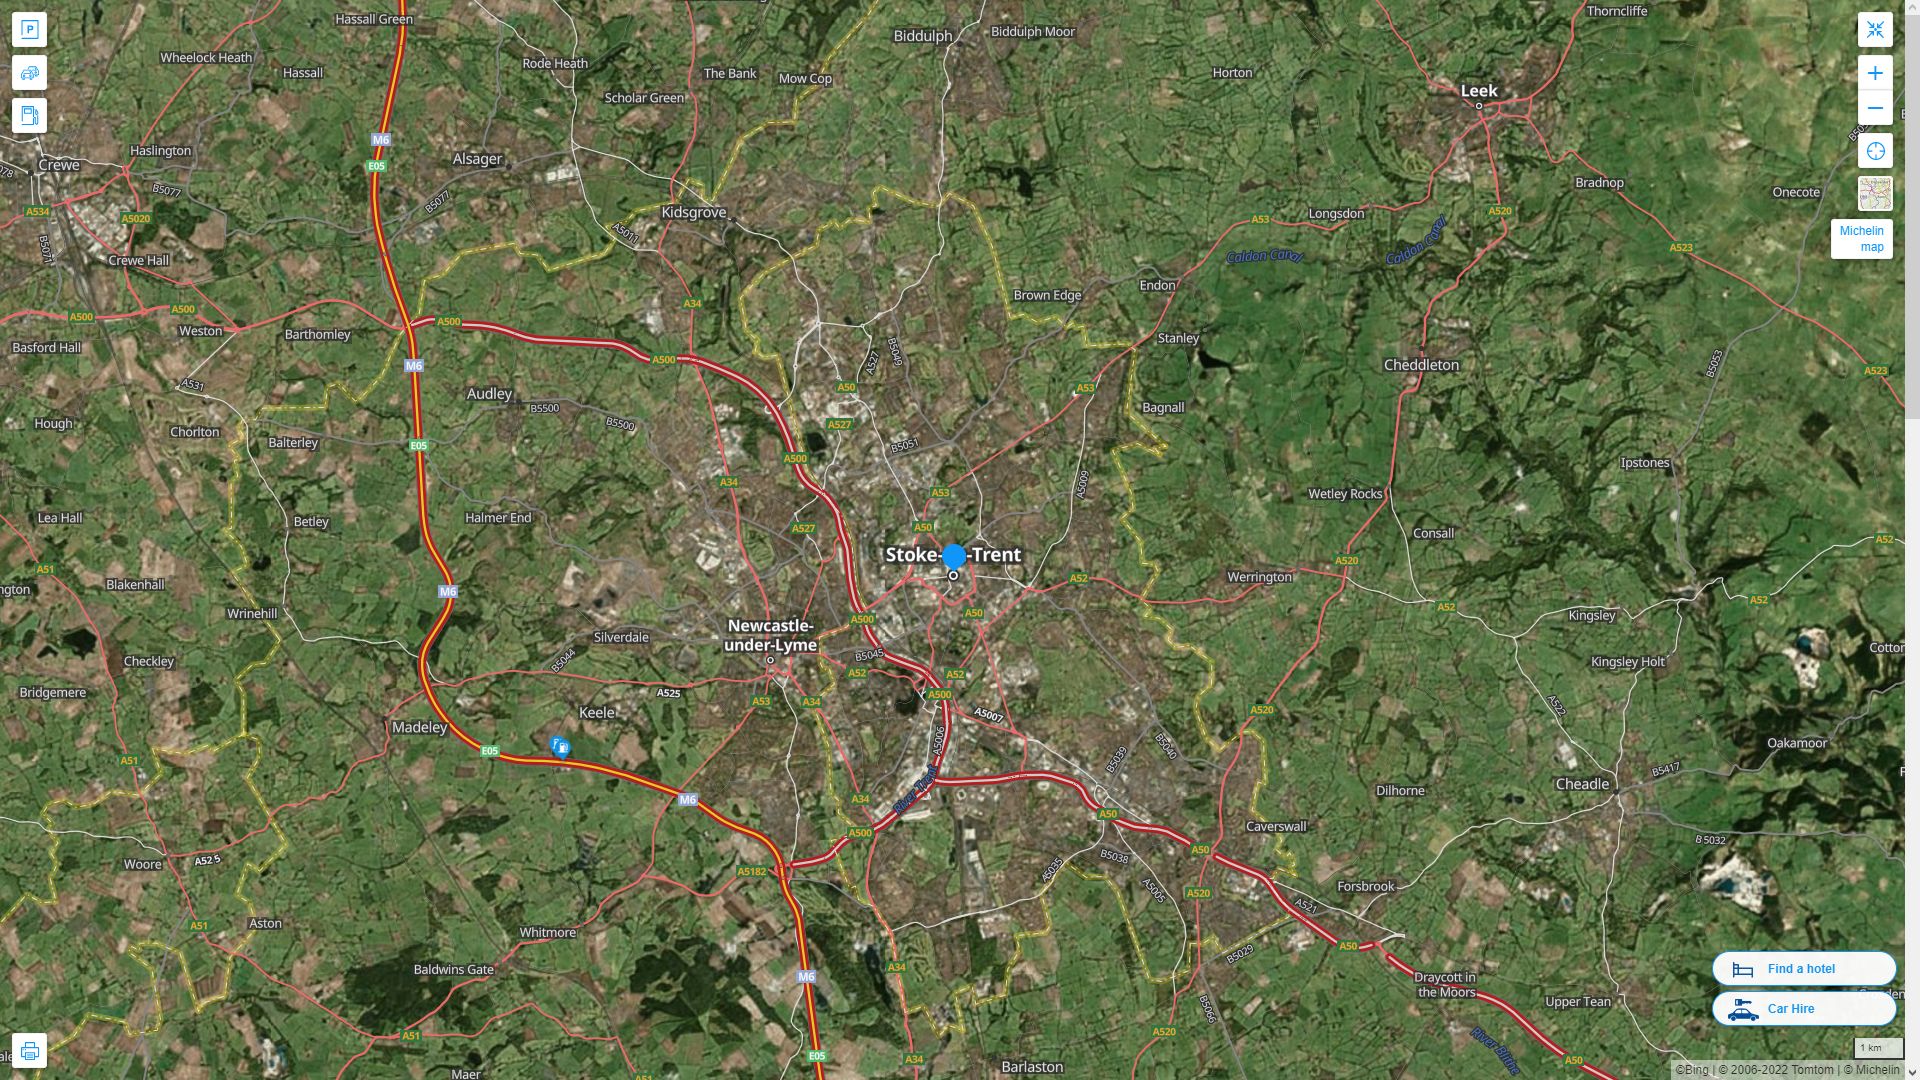 Stoke on Trent Highway and Road Map with Satellite View